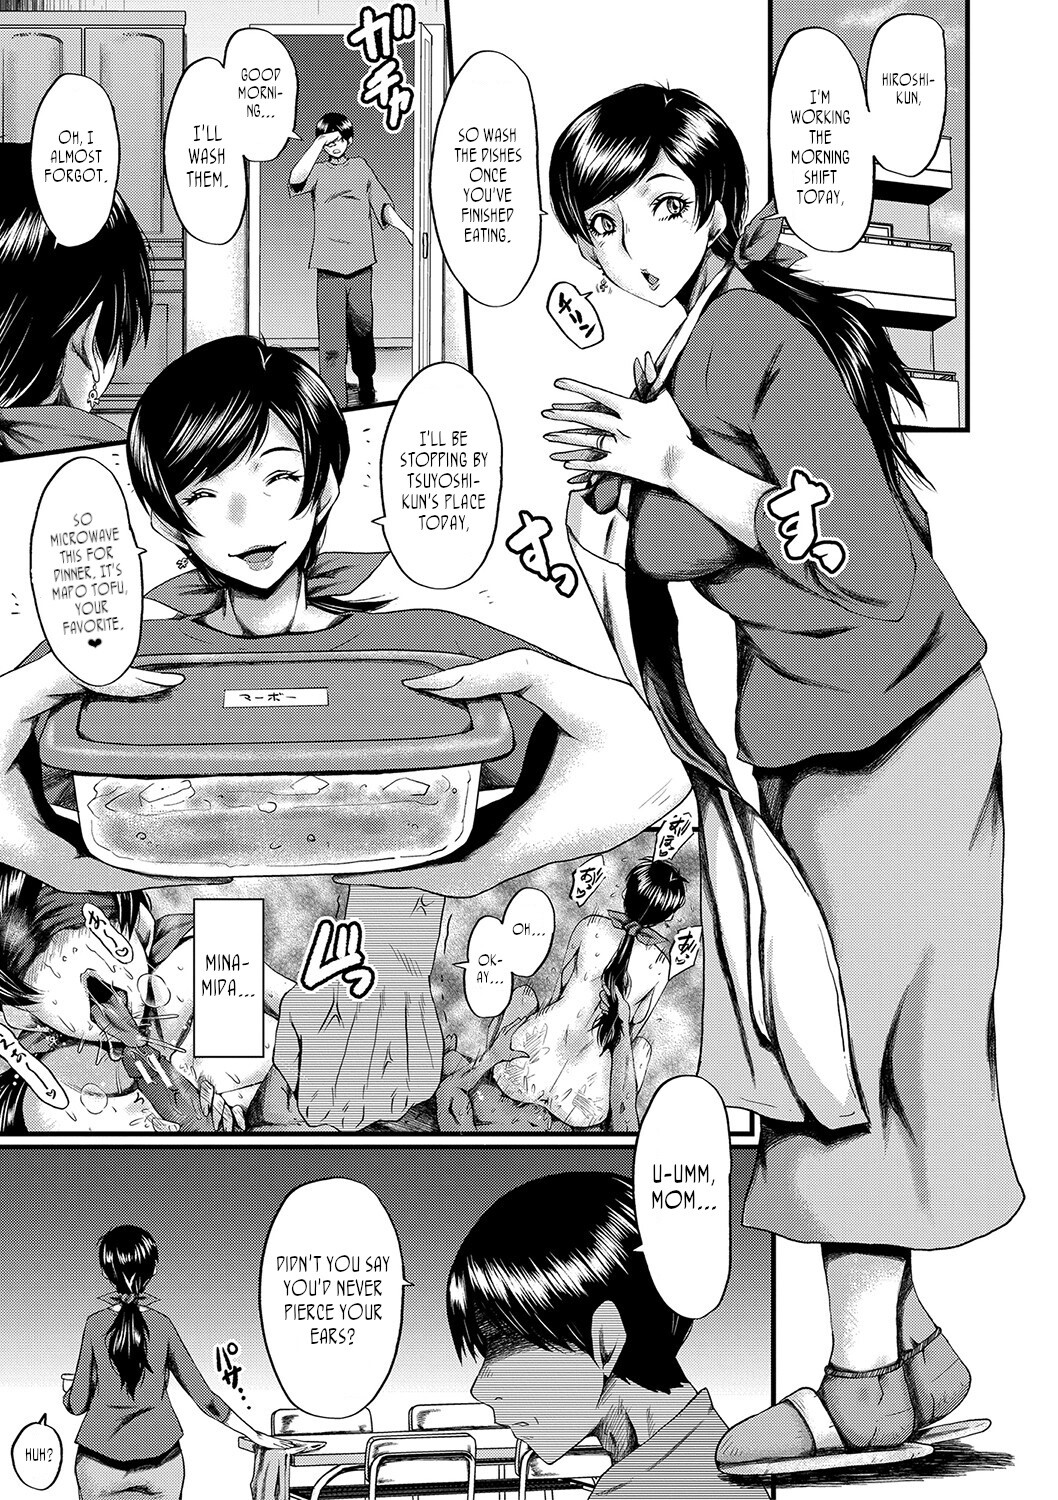 Hentai Manga Comic-My friend stole away both my childhood friend and my mother-Chapter 6-1